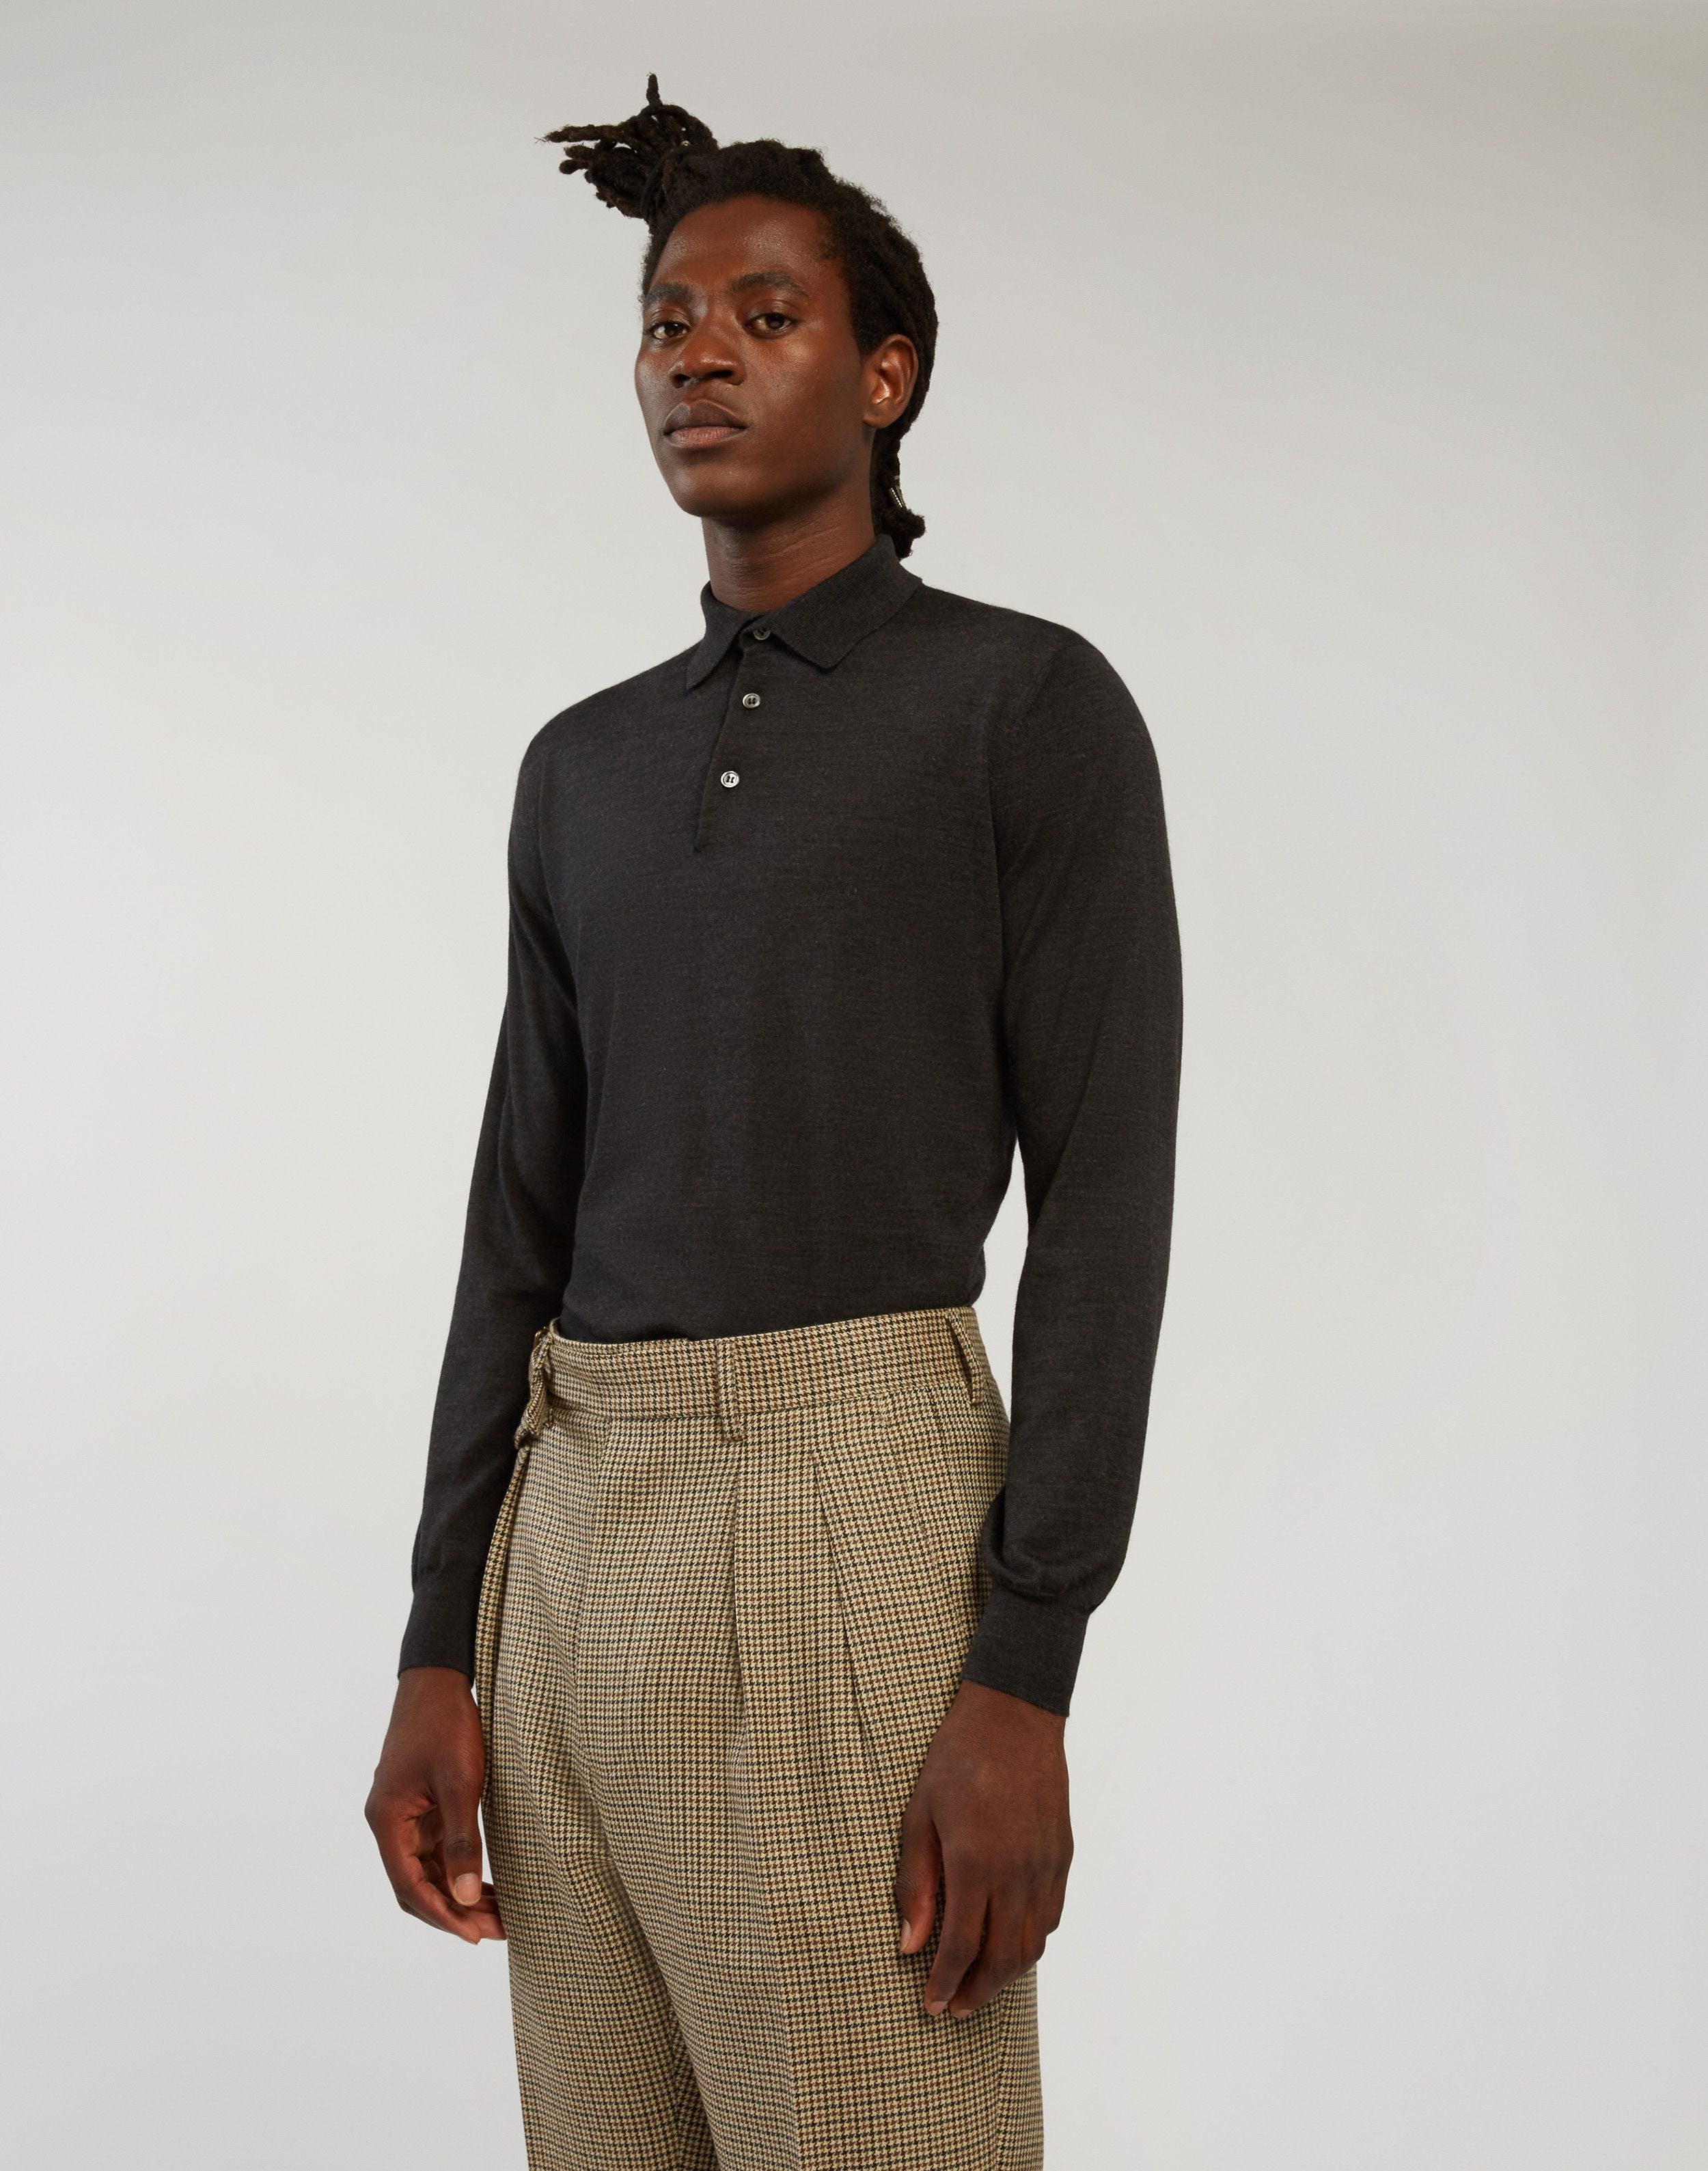 Grey polo shirt in cashmere, wool and silk